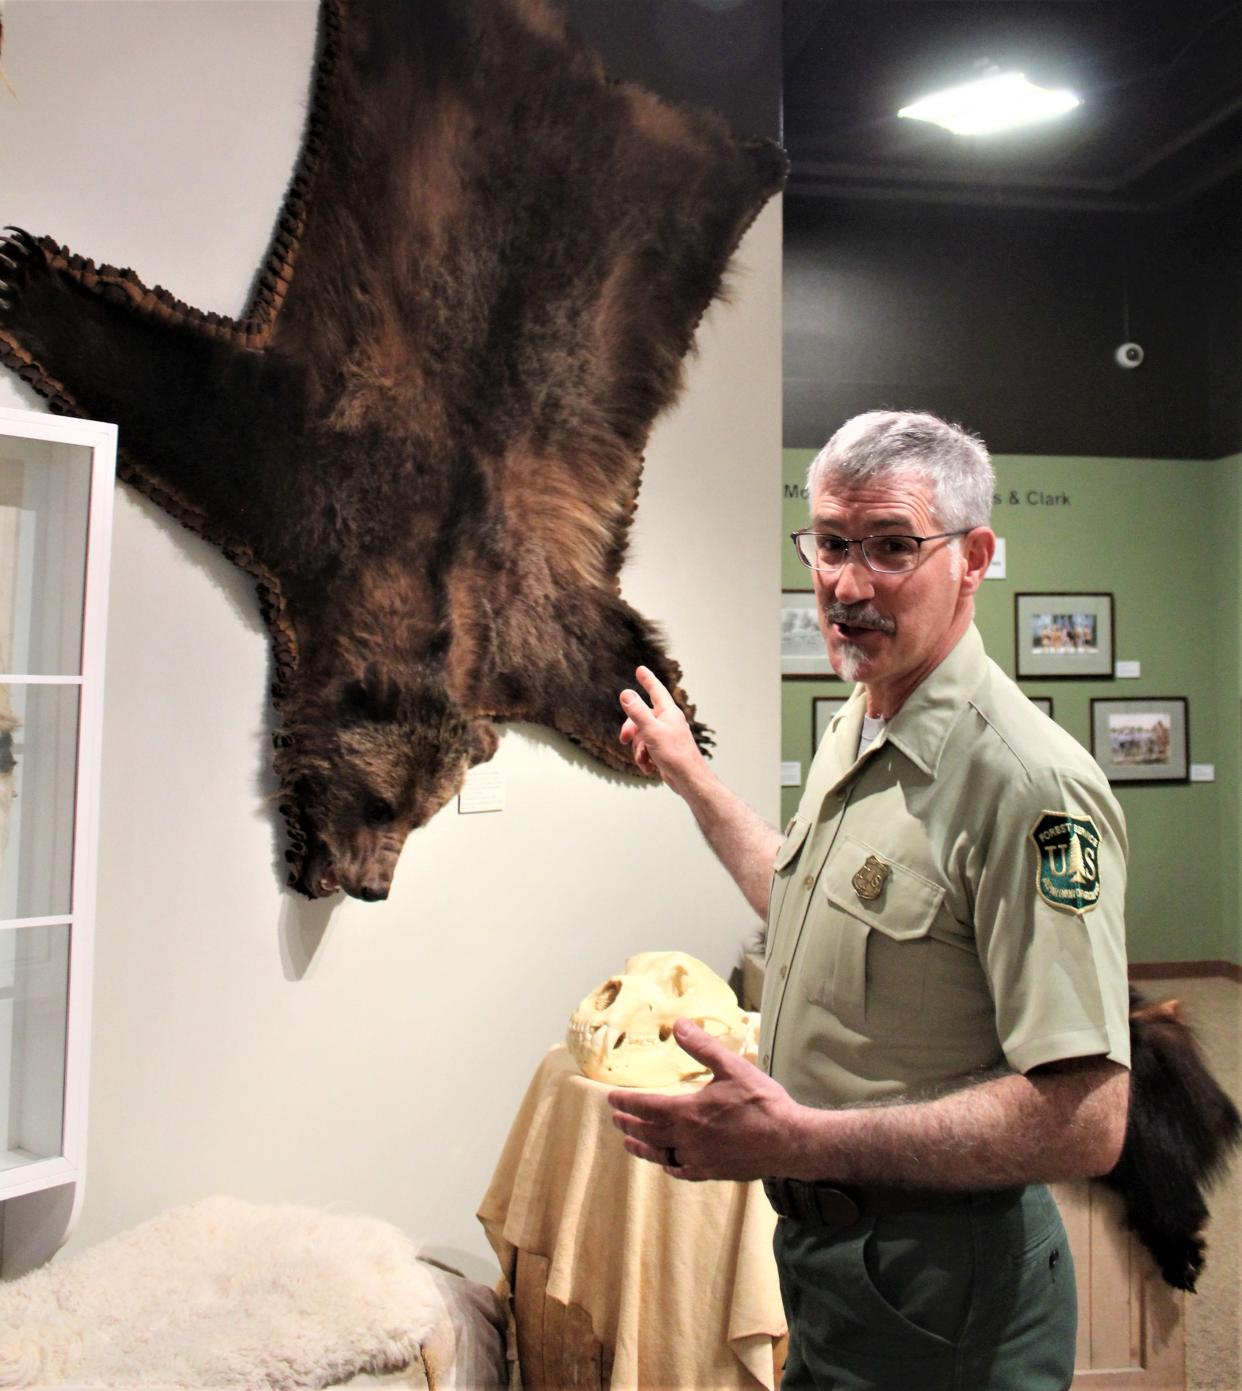 Lewis and Clark Interpretive Center Director Duane Buchi points out a Grizzly Bear pelt recently acquired for display from Montana Fish, Wildlife and Parks.